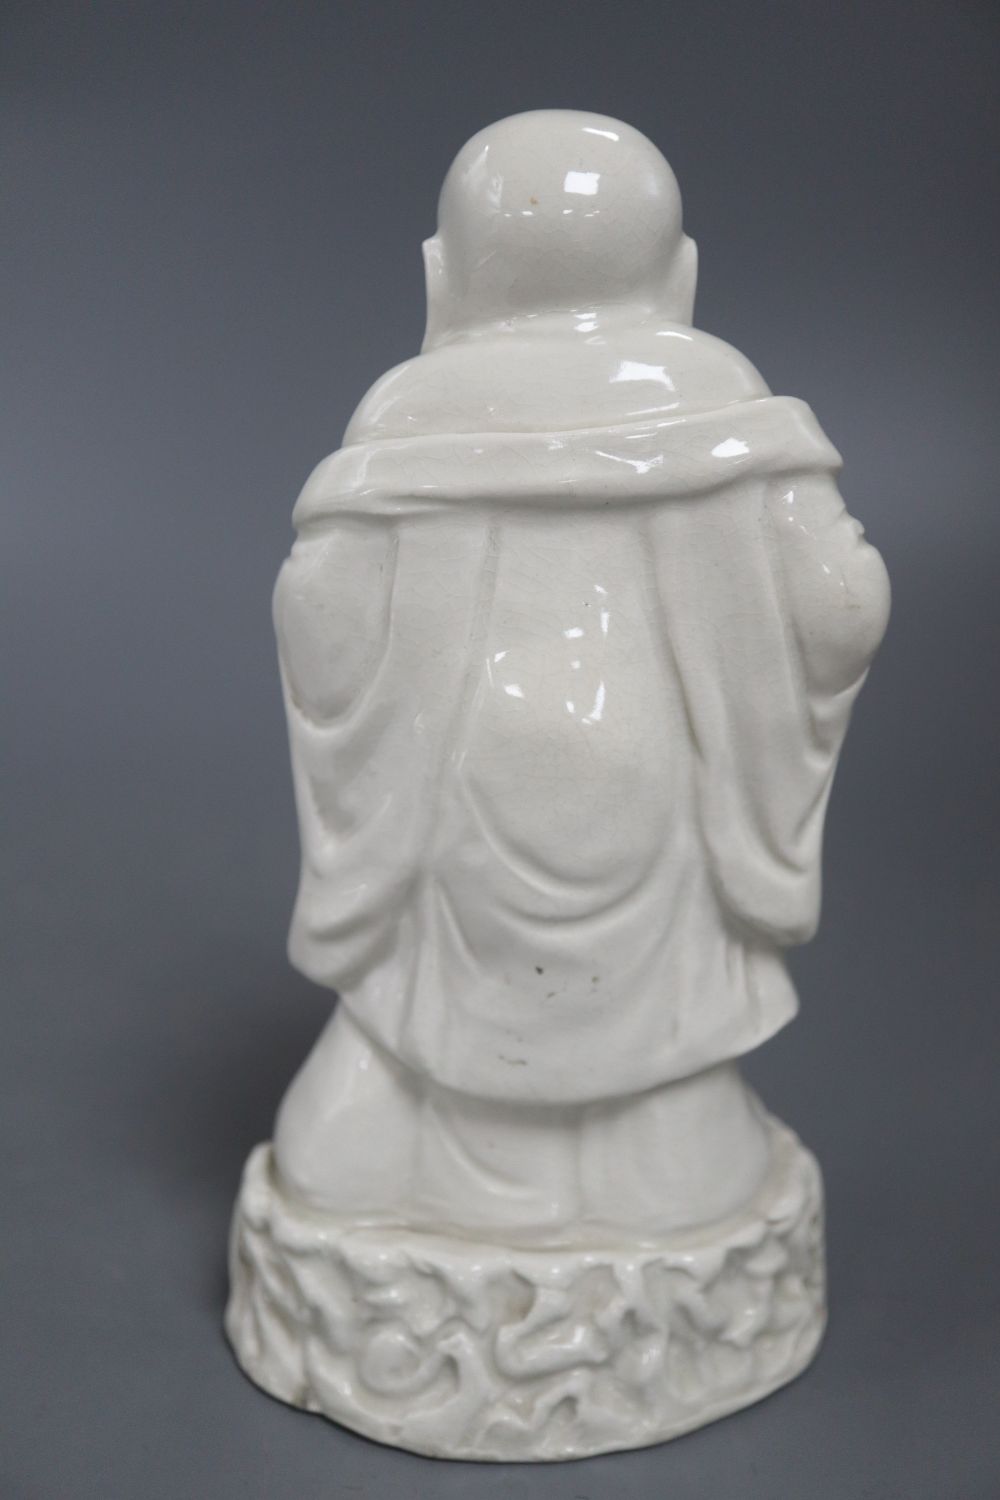 A Chinese blanc-de-chine figure of Shao Lao